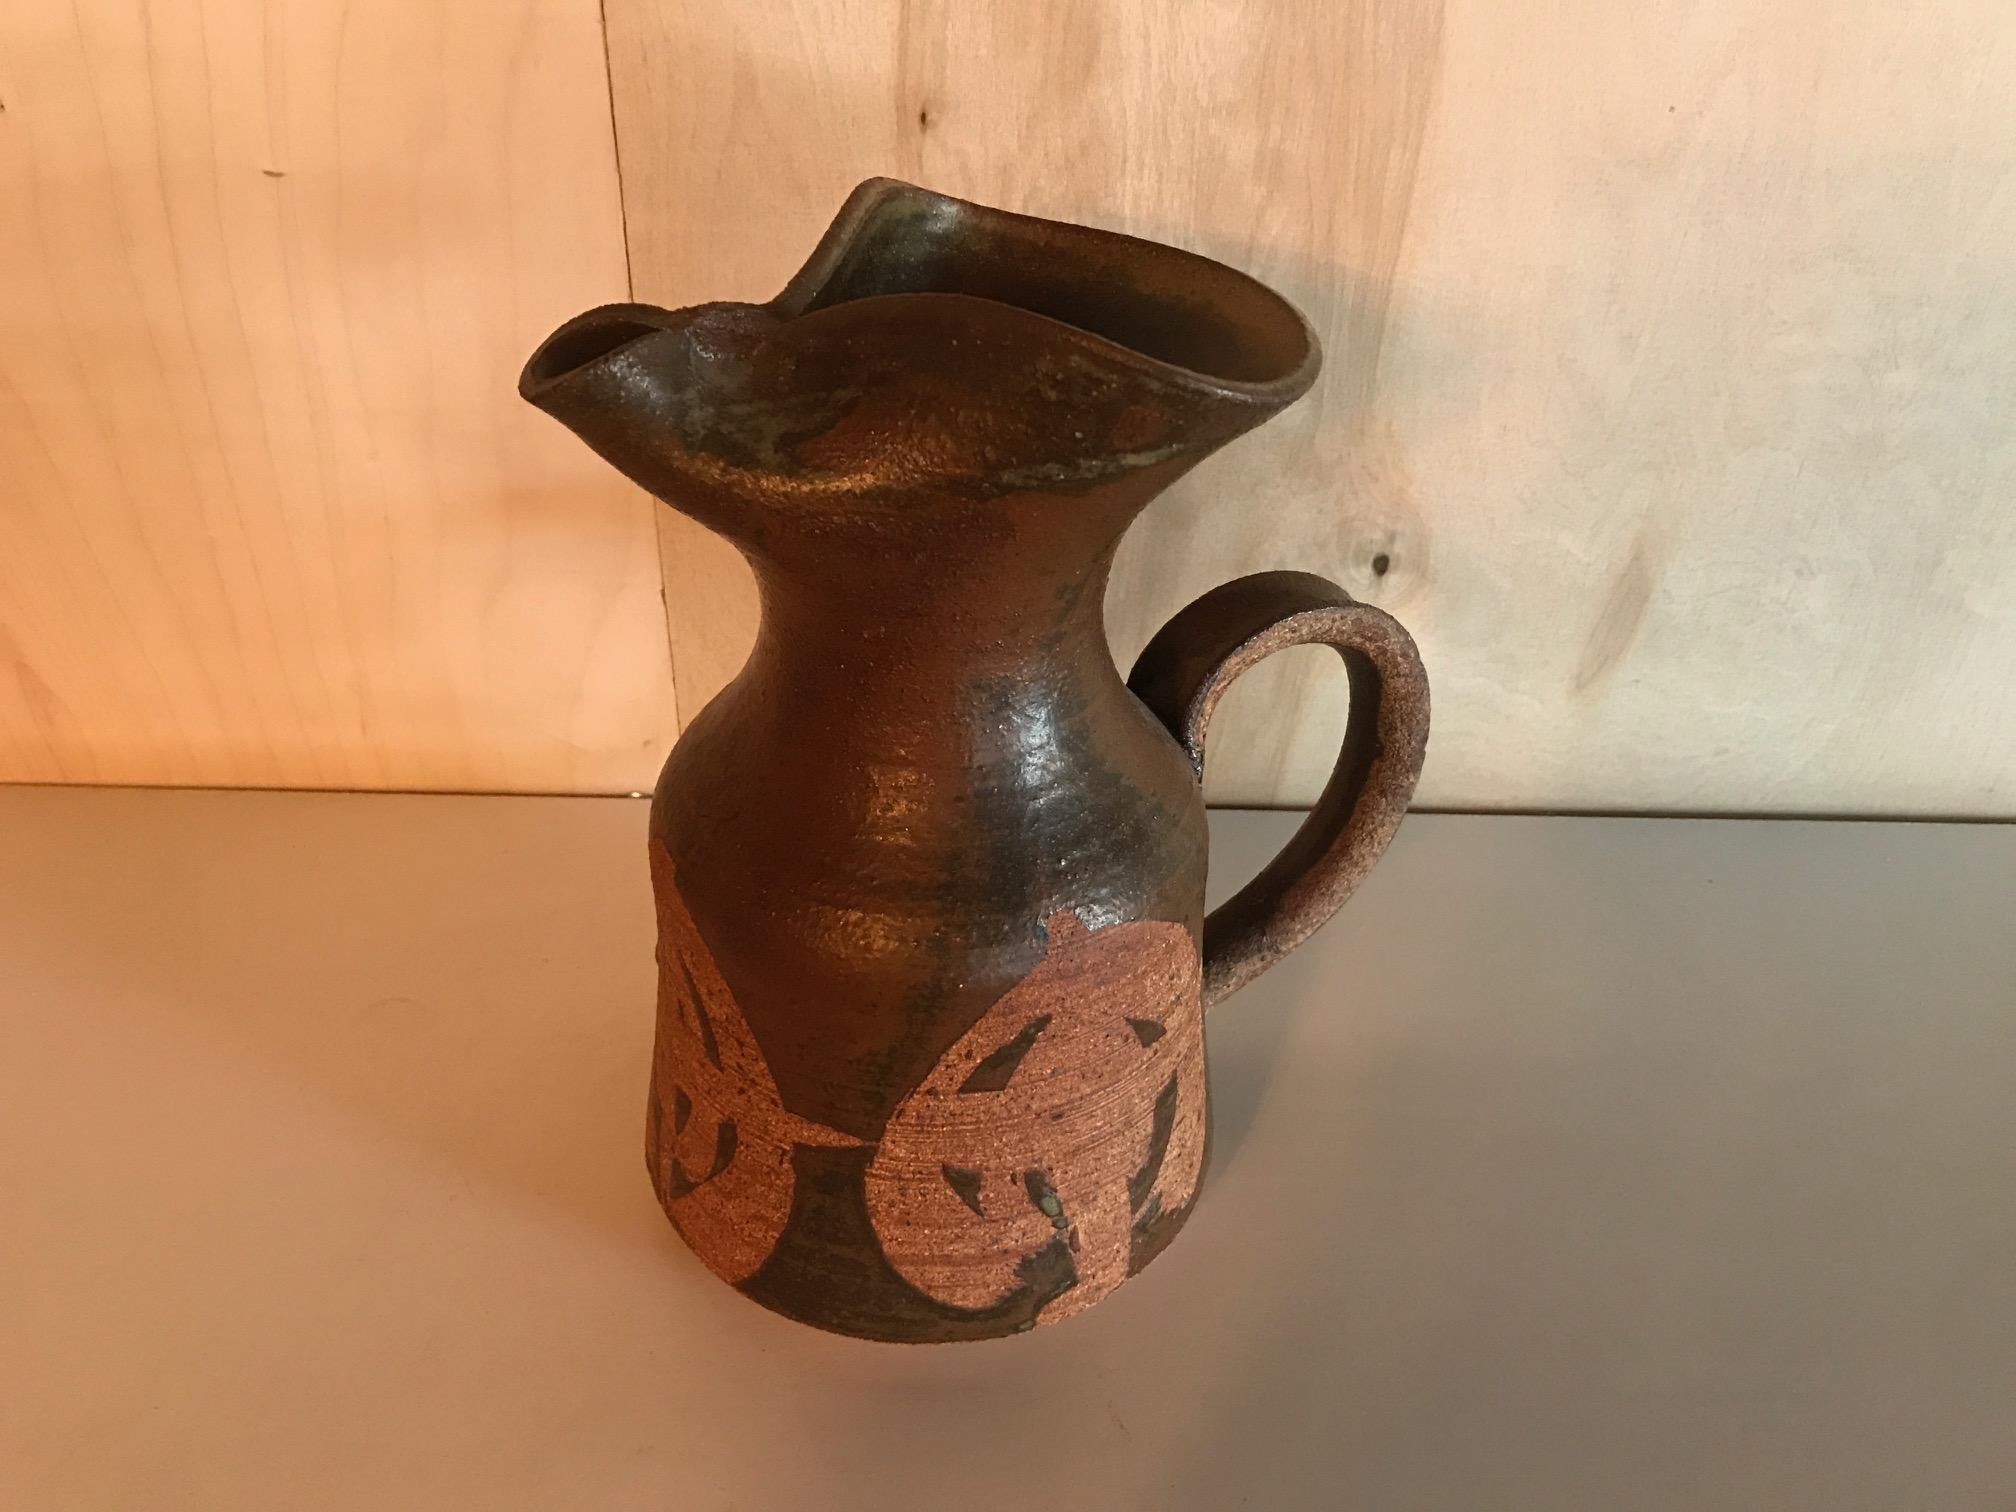 Midcentury Vintage Ceramic Pitcher Pottery Art Organic Design In Excellent Condition For Sale In Salt Lake City, UT